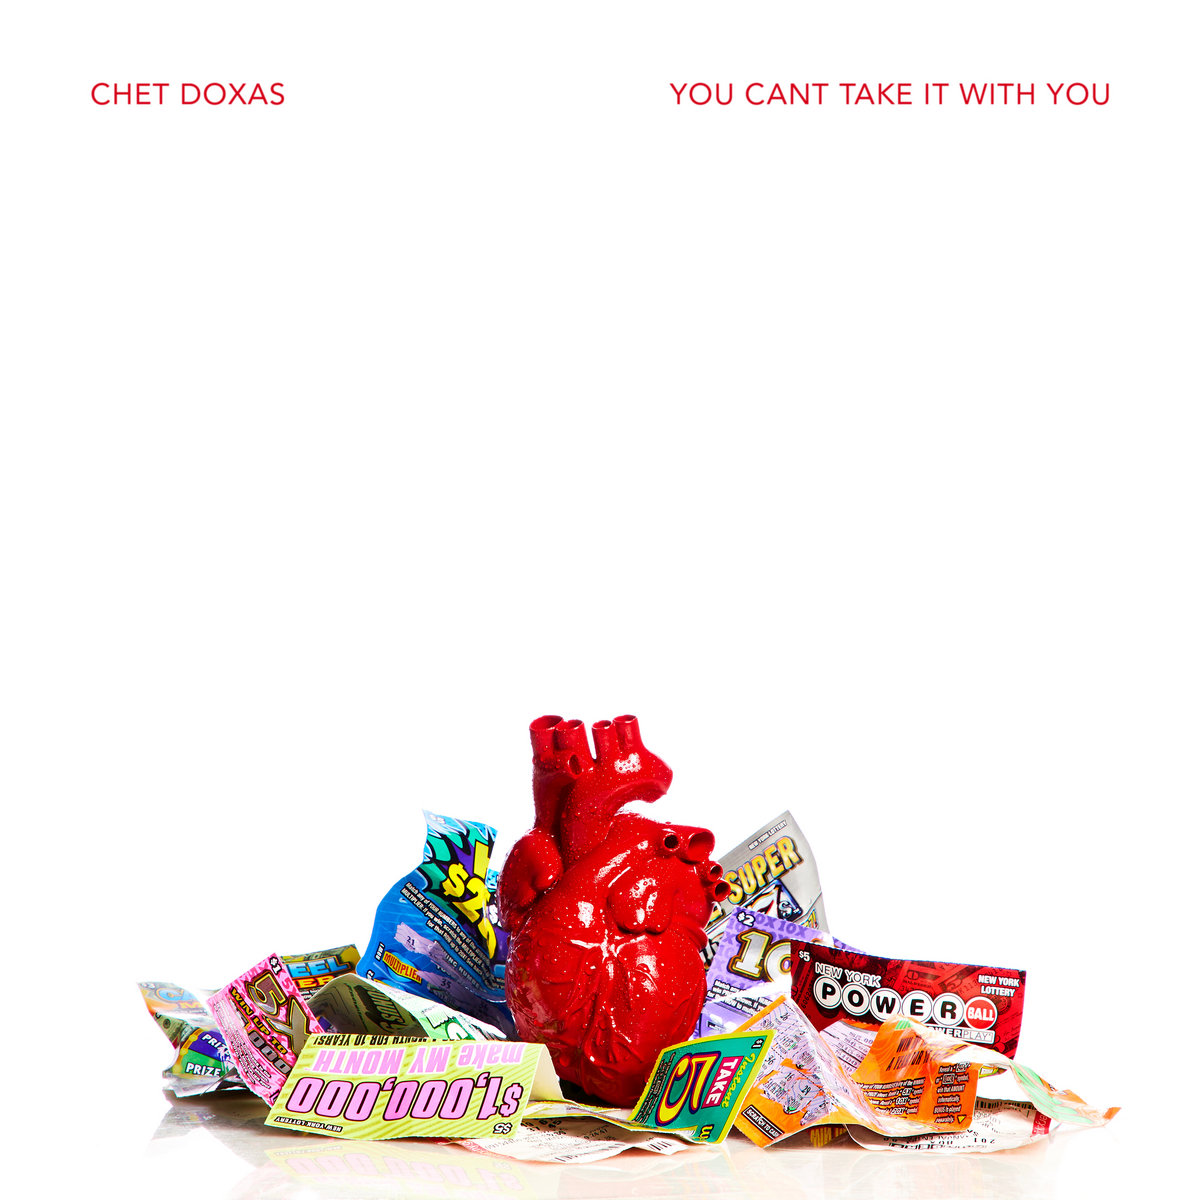 Chet Doxas – You Can’t Take It With You (2021) [FLAC 24bit/96kHz]